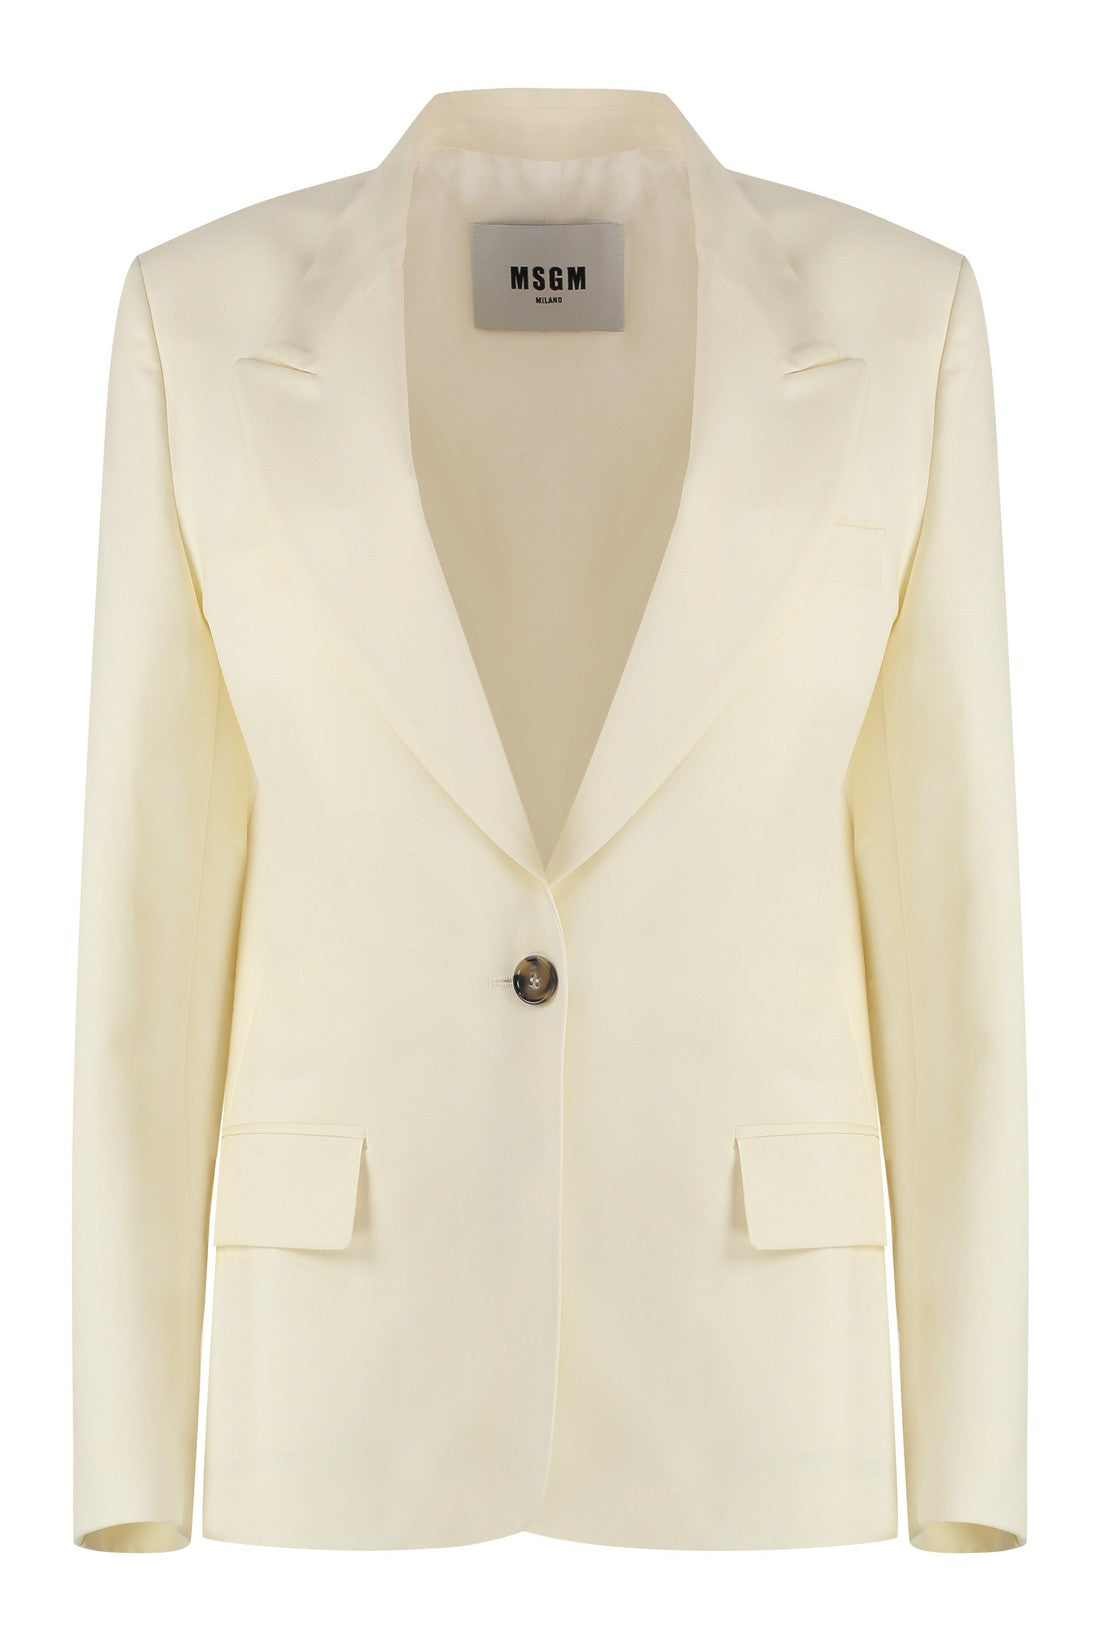 MSGM-OUTLET-SALE-Wool single-breasted blazer-ARCHIVIST